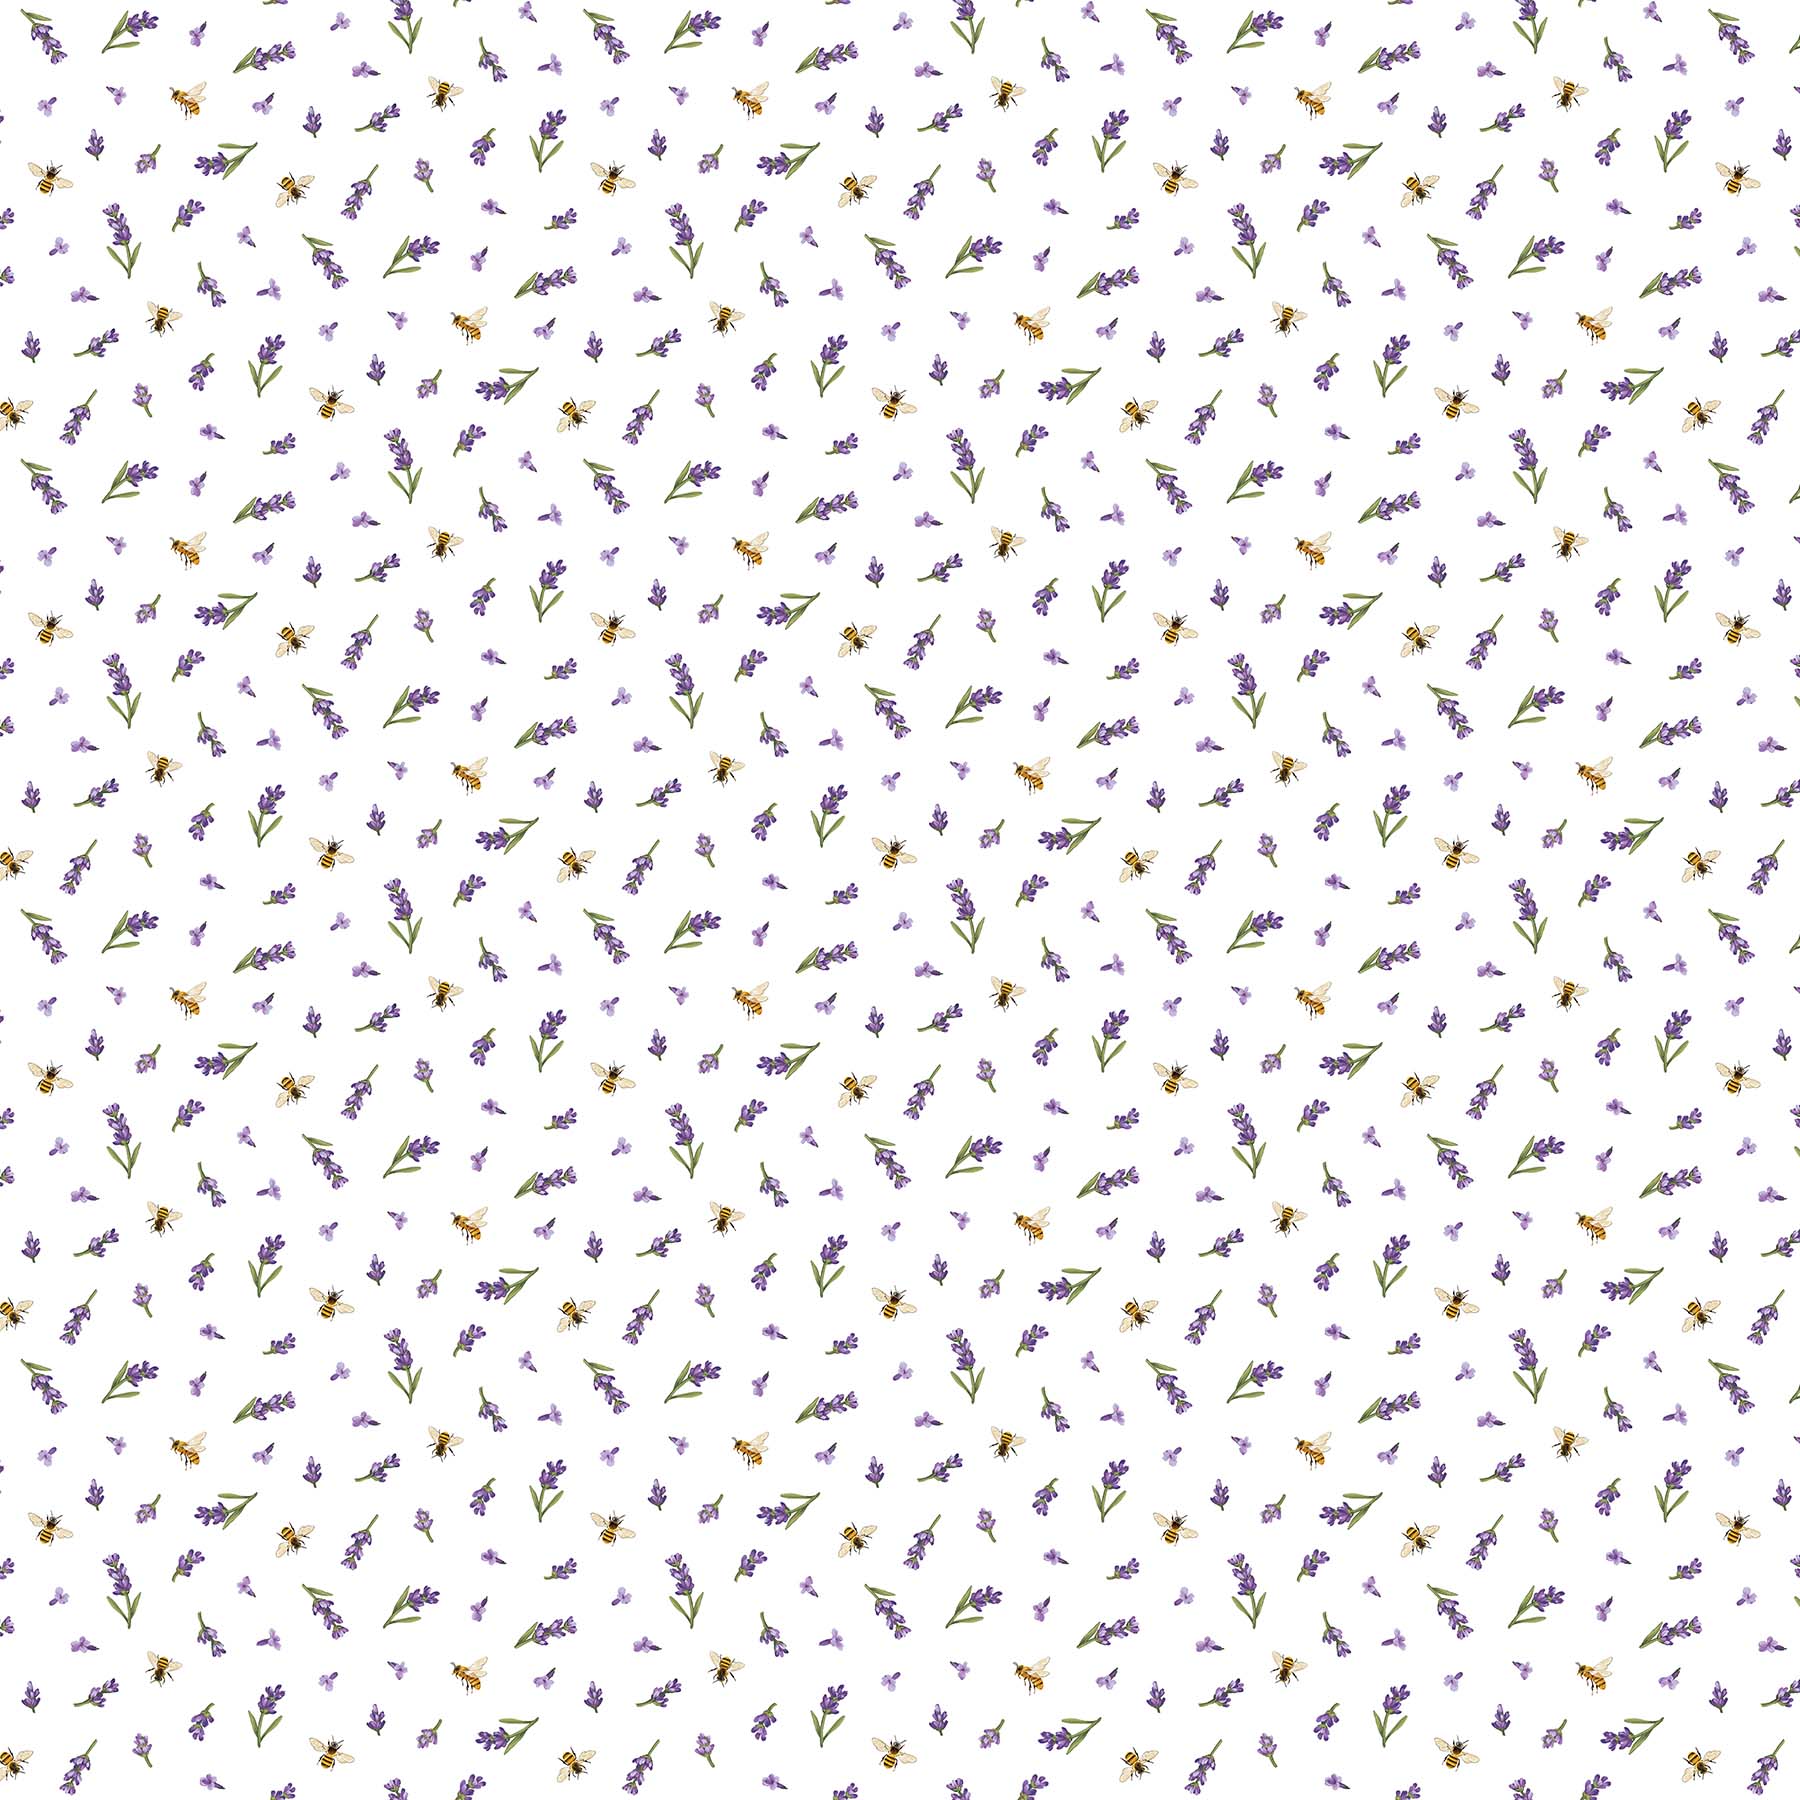 Lavender Market 100% Cotton Fabric - By the Yard - 24477-10 - Bee Toss - White Multi